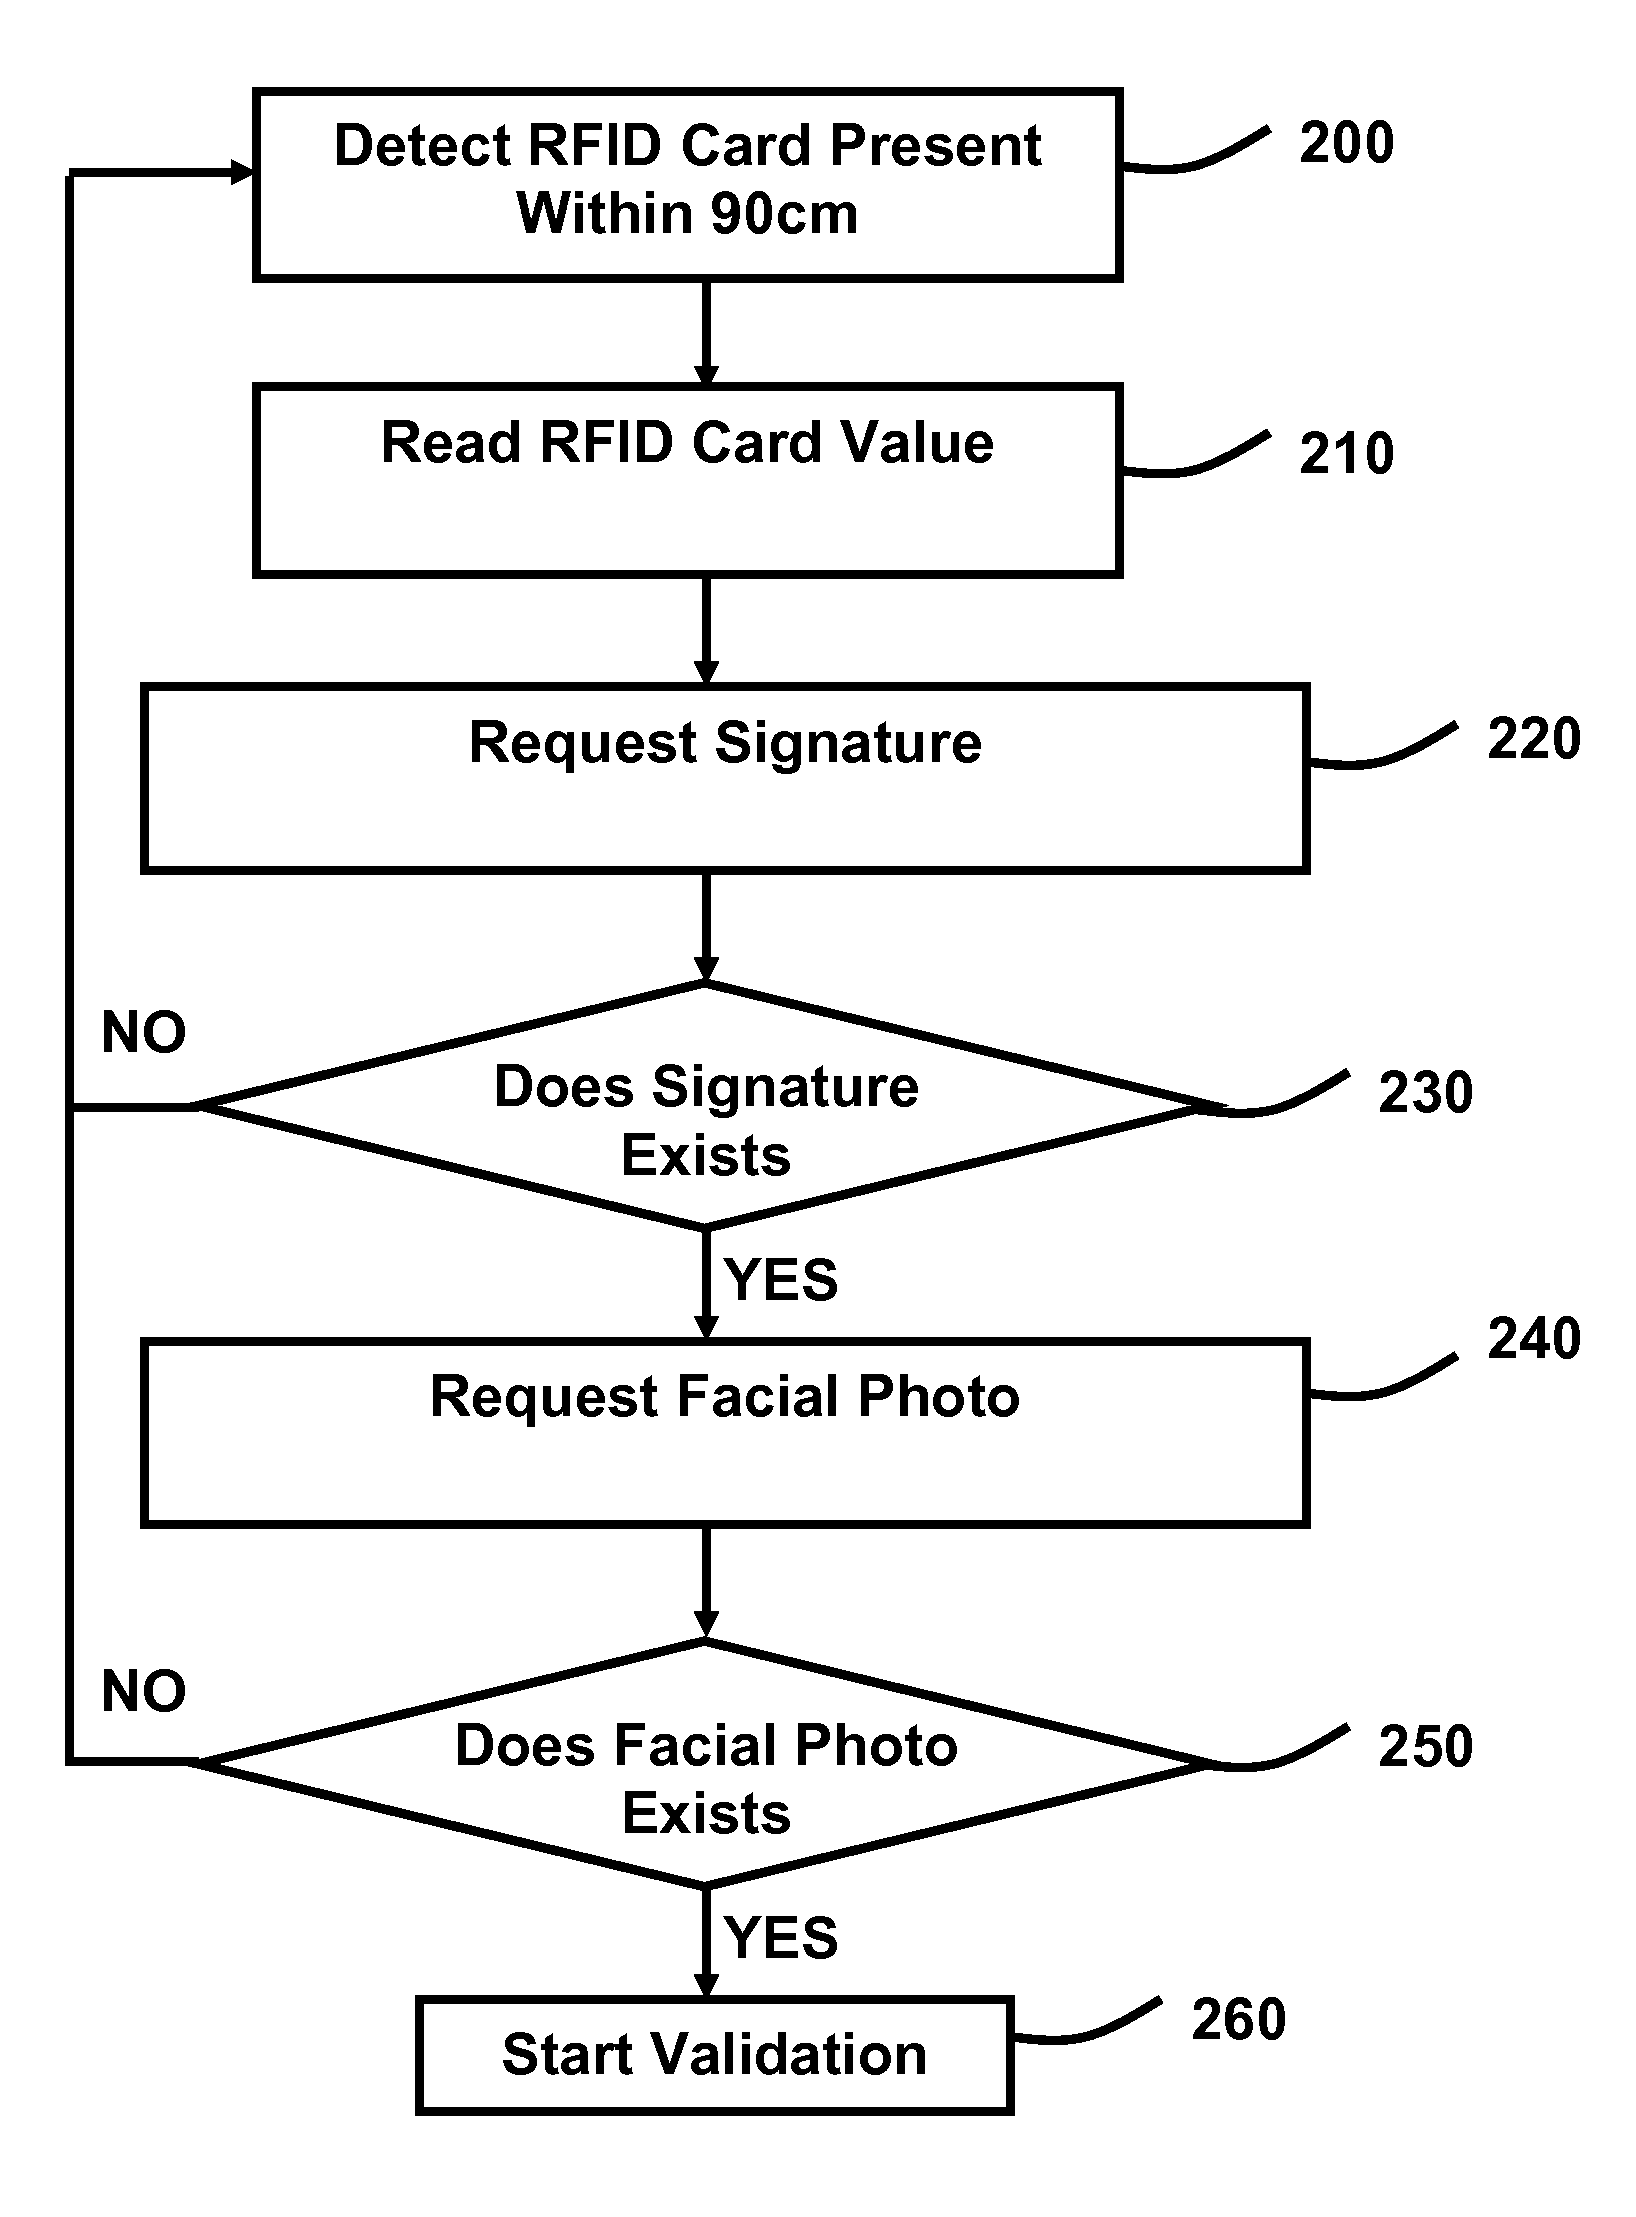 Method for authenticating a person's identity by using a RFID card, biometric signature recognition and facial recognition.